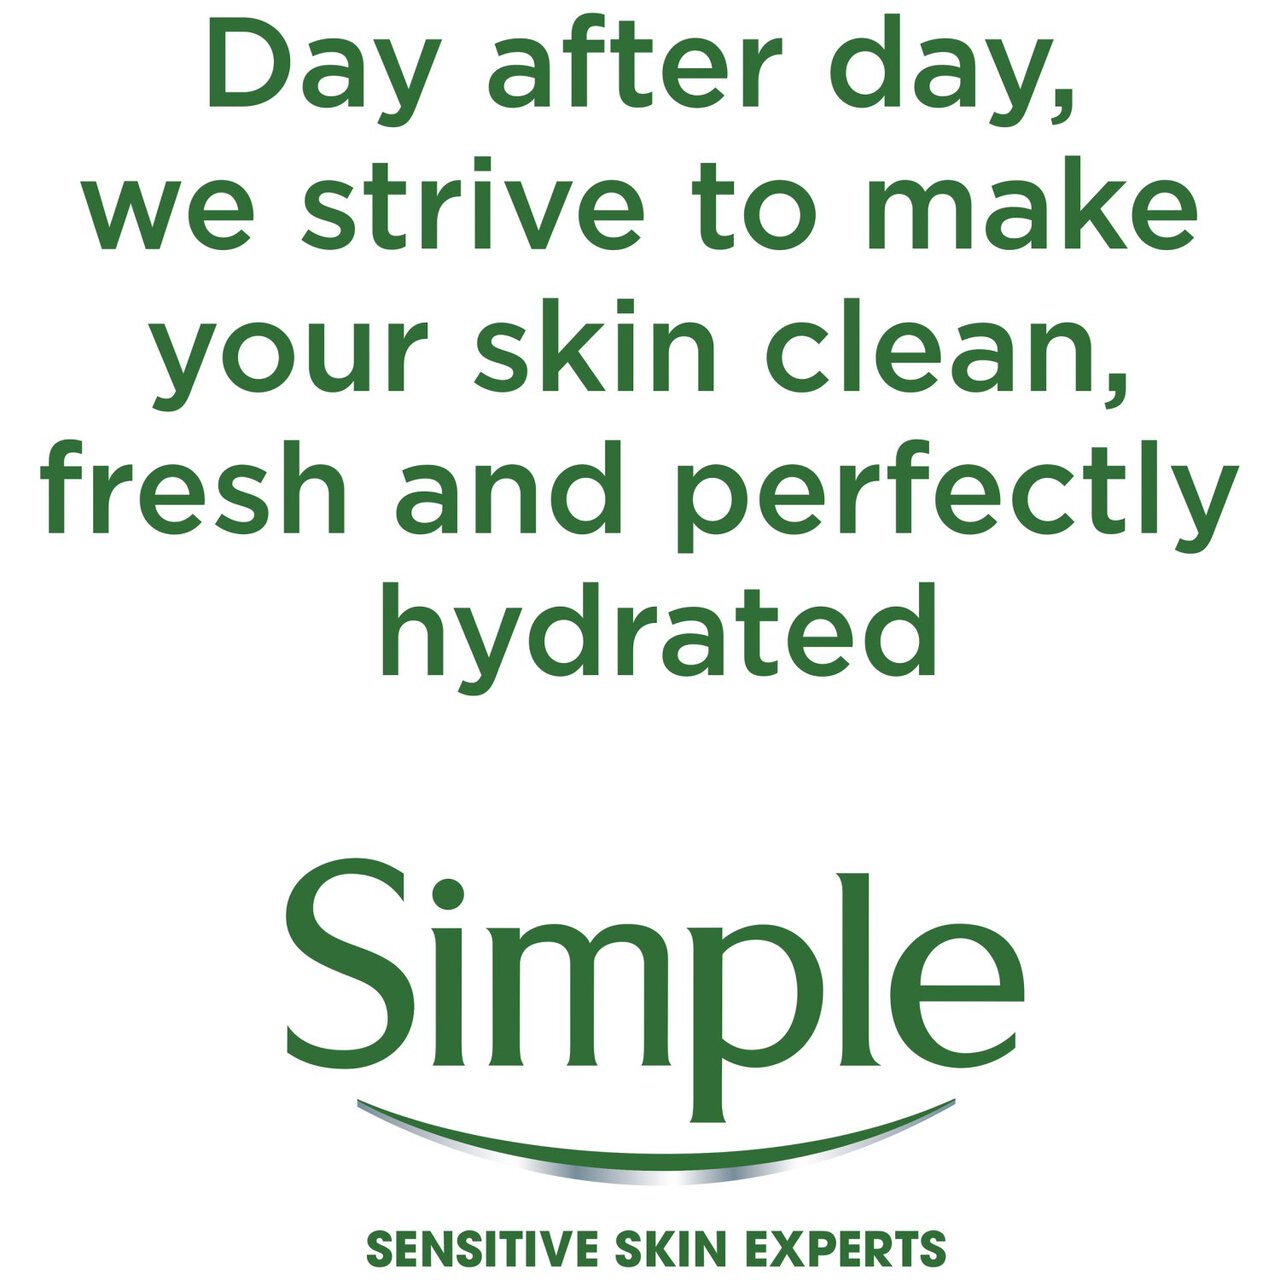 Simple Kind to Skin Micellar Biodegradable Cleansing Wipes 2 x 20 per pack